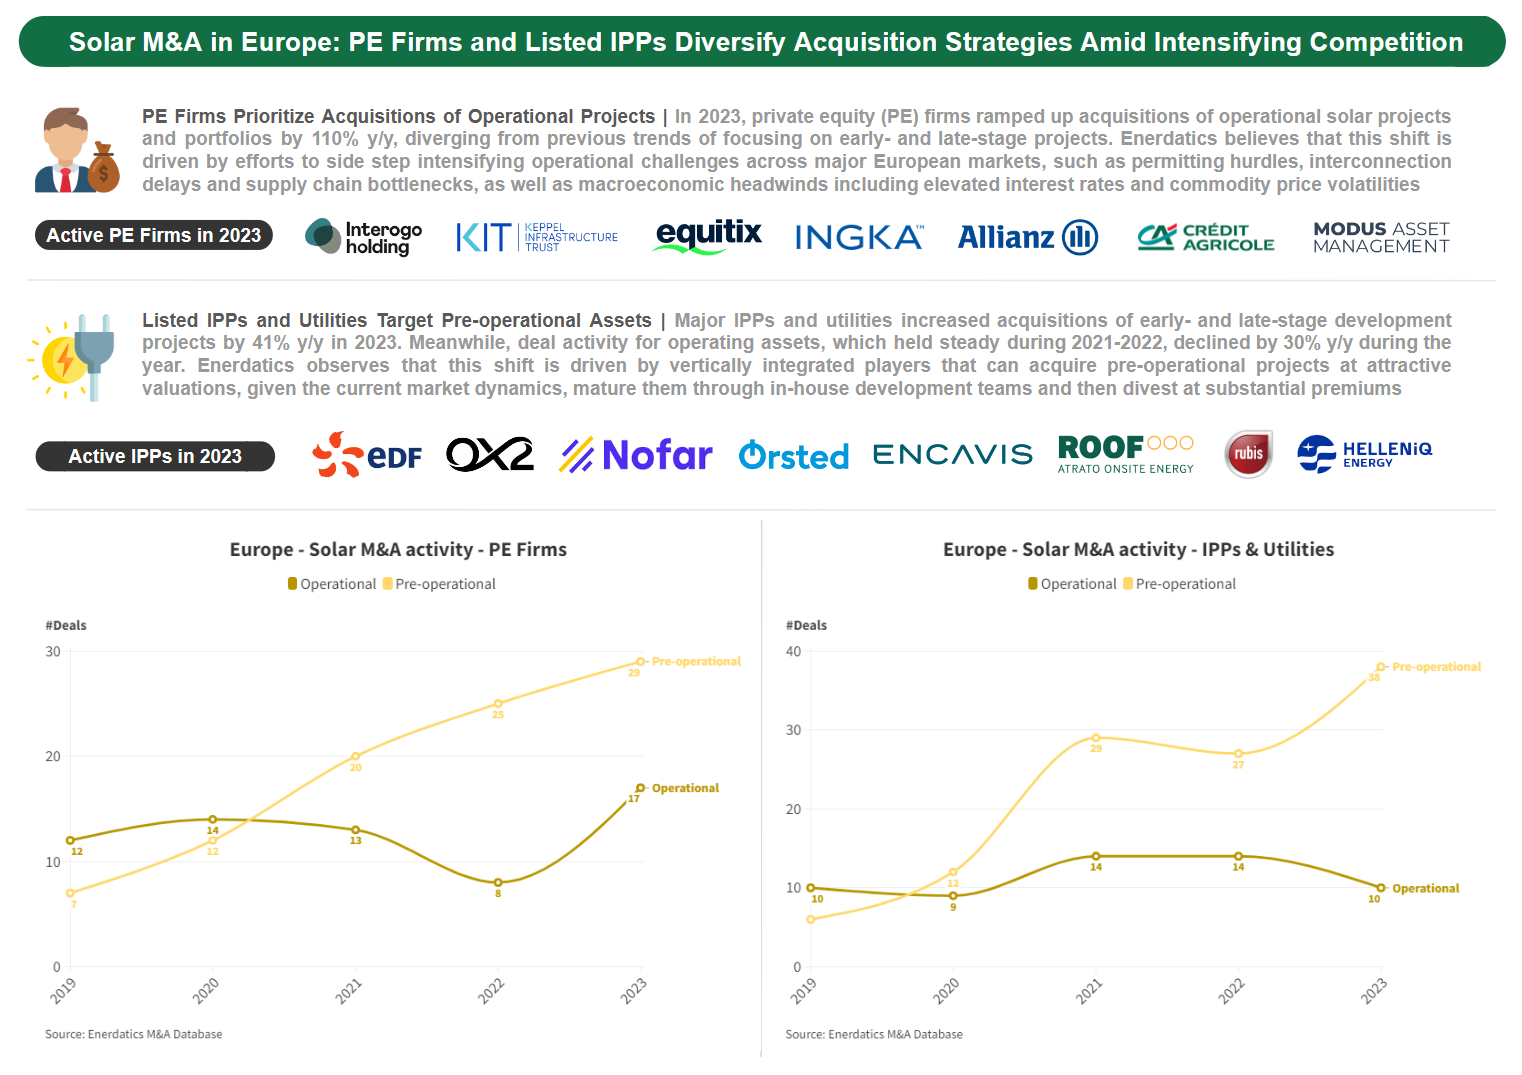 Solar M&A Trends in Europe: PE Firms vs. Listed IPPs